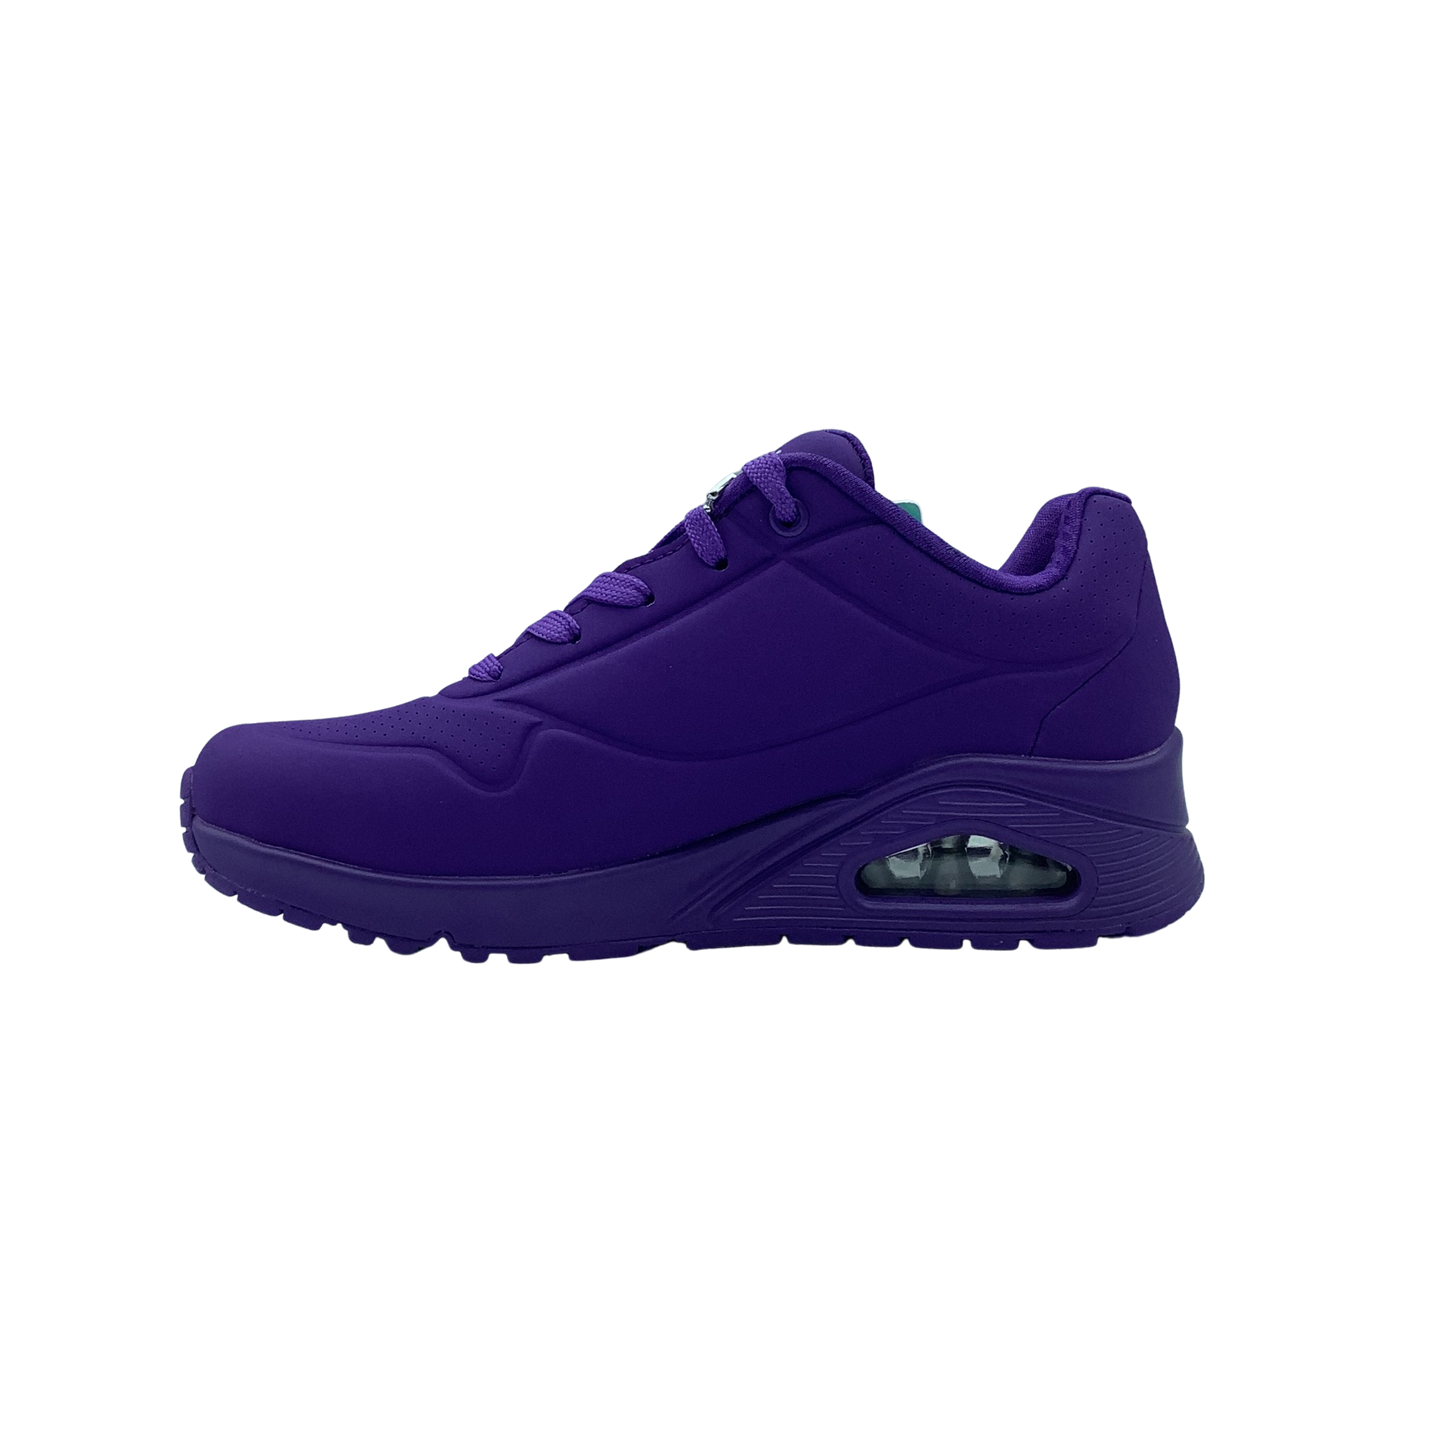 Skechers Stand on air WN' Uno night shades